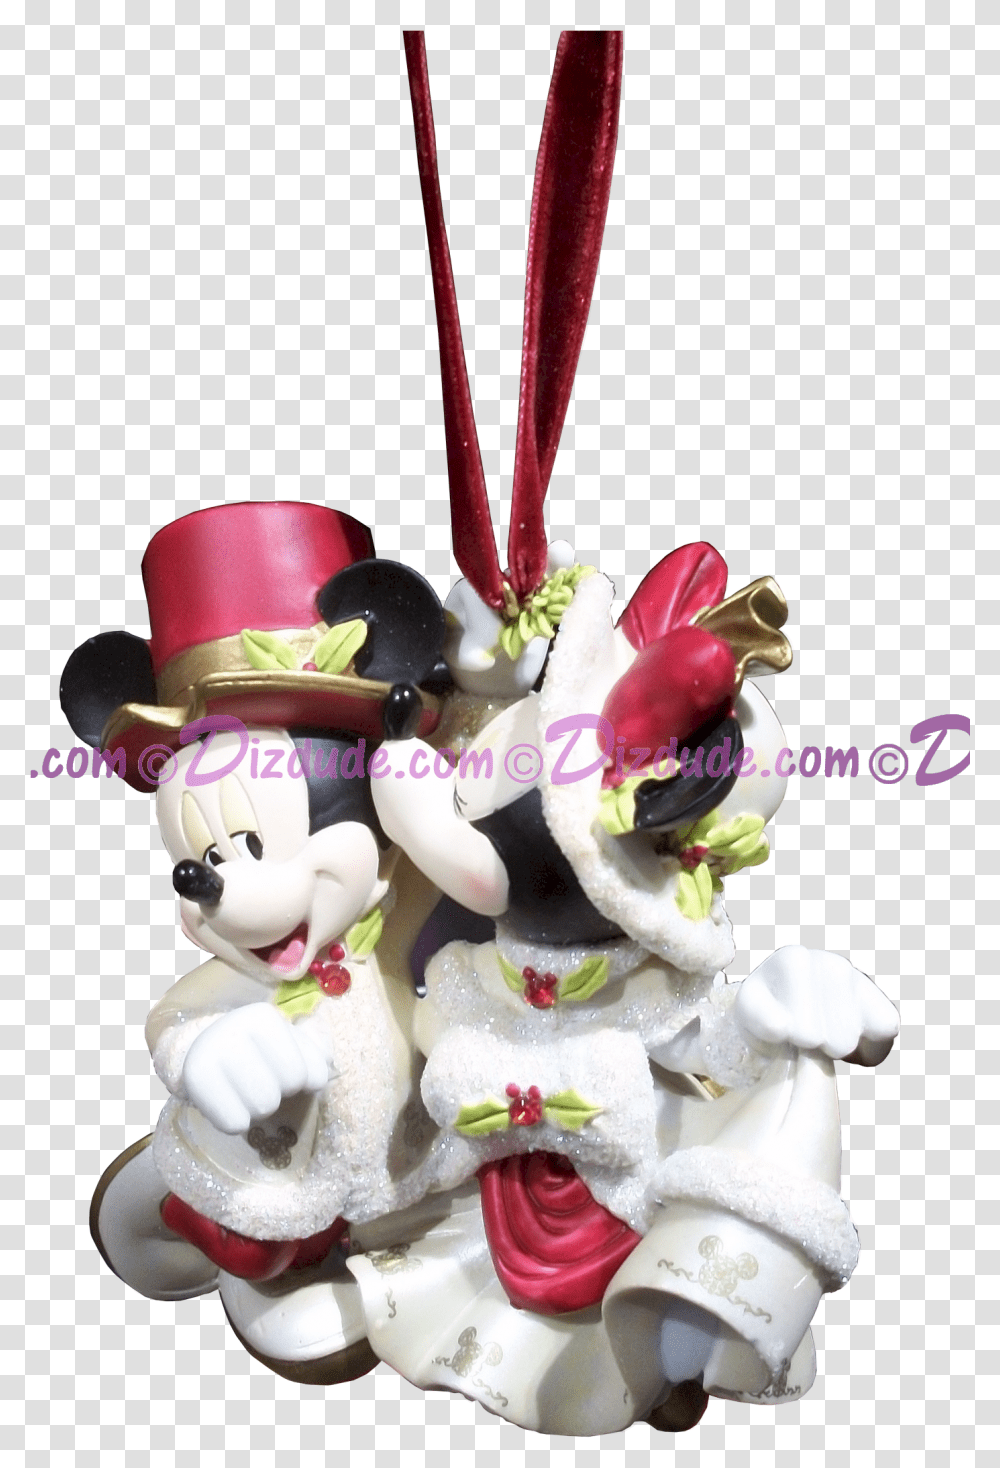 Disney Mickey Mouse And Minnie Mouse Hanging Ornament Figurine, Sweets, Food, Confectionery, Dessert Transparent Png